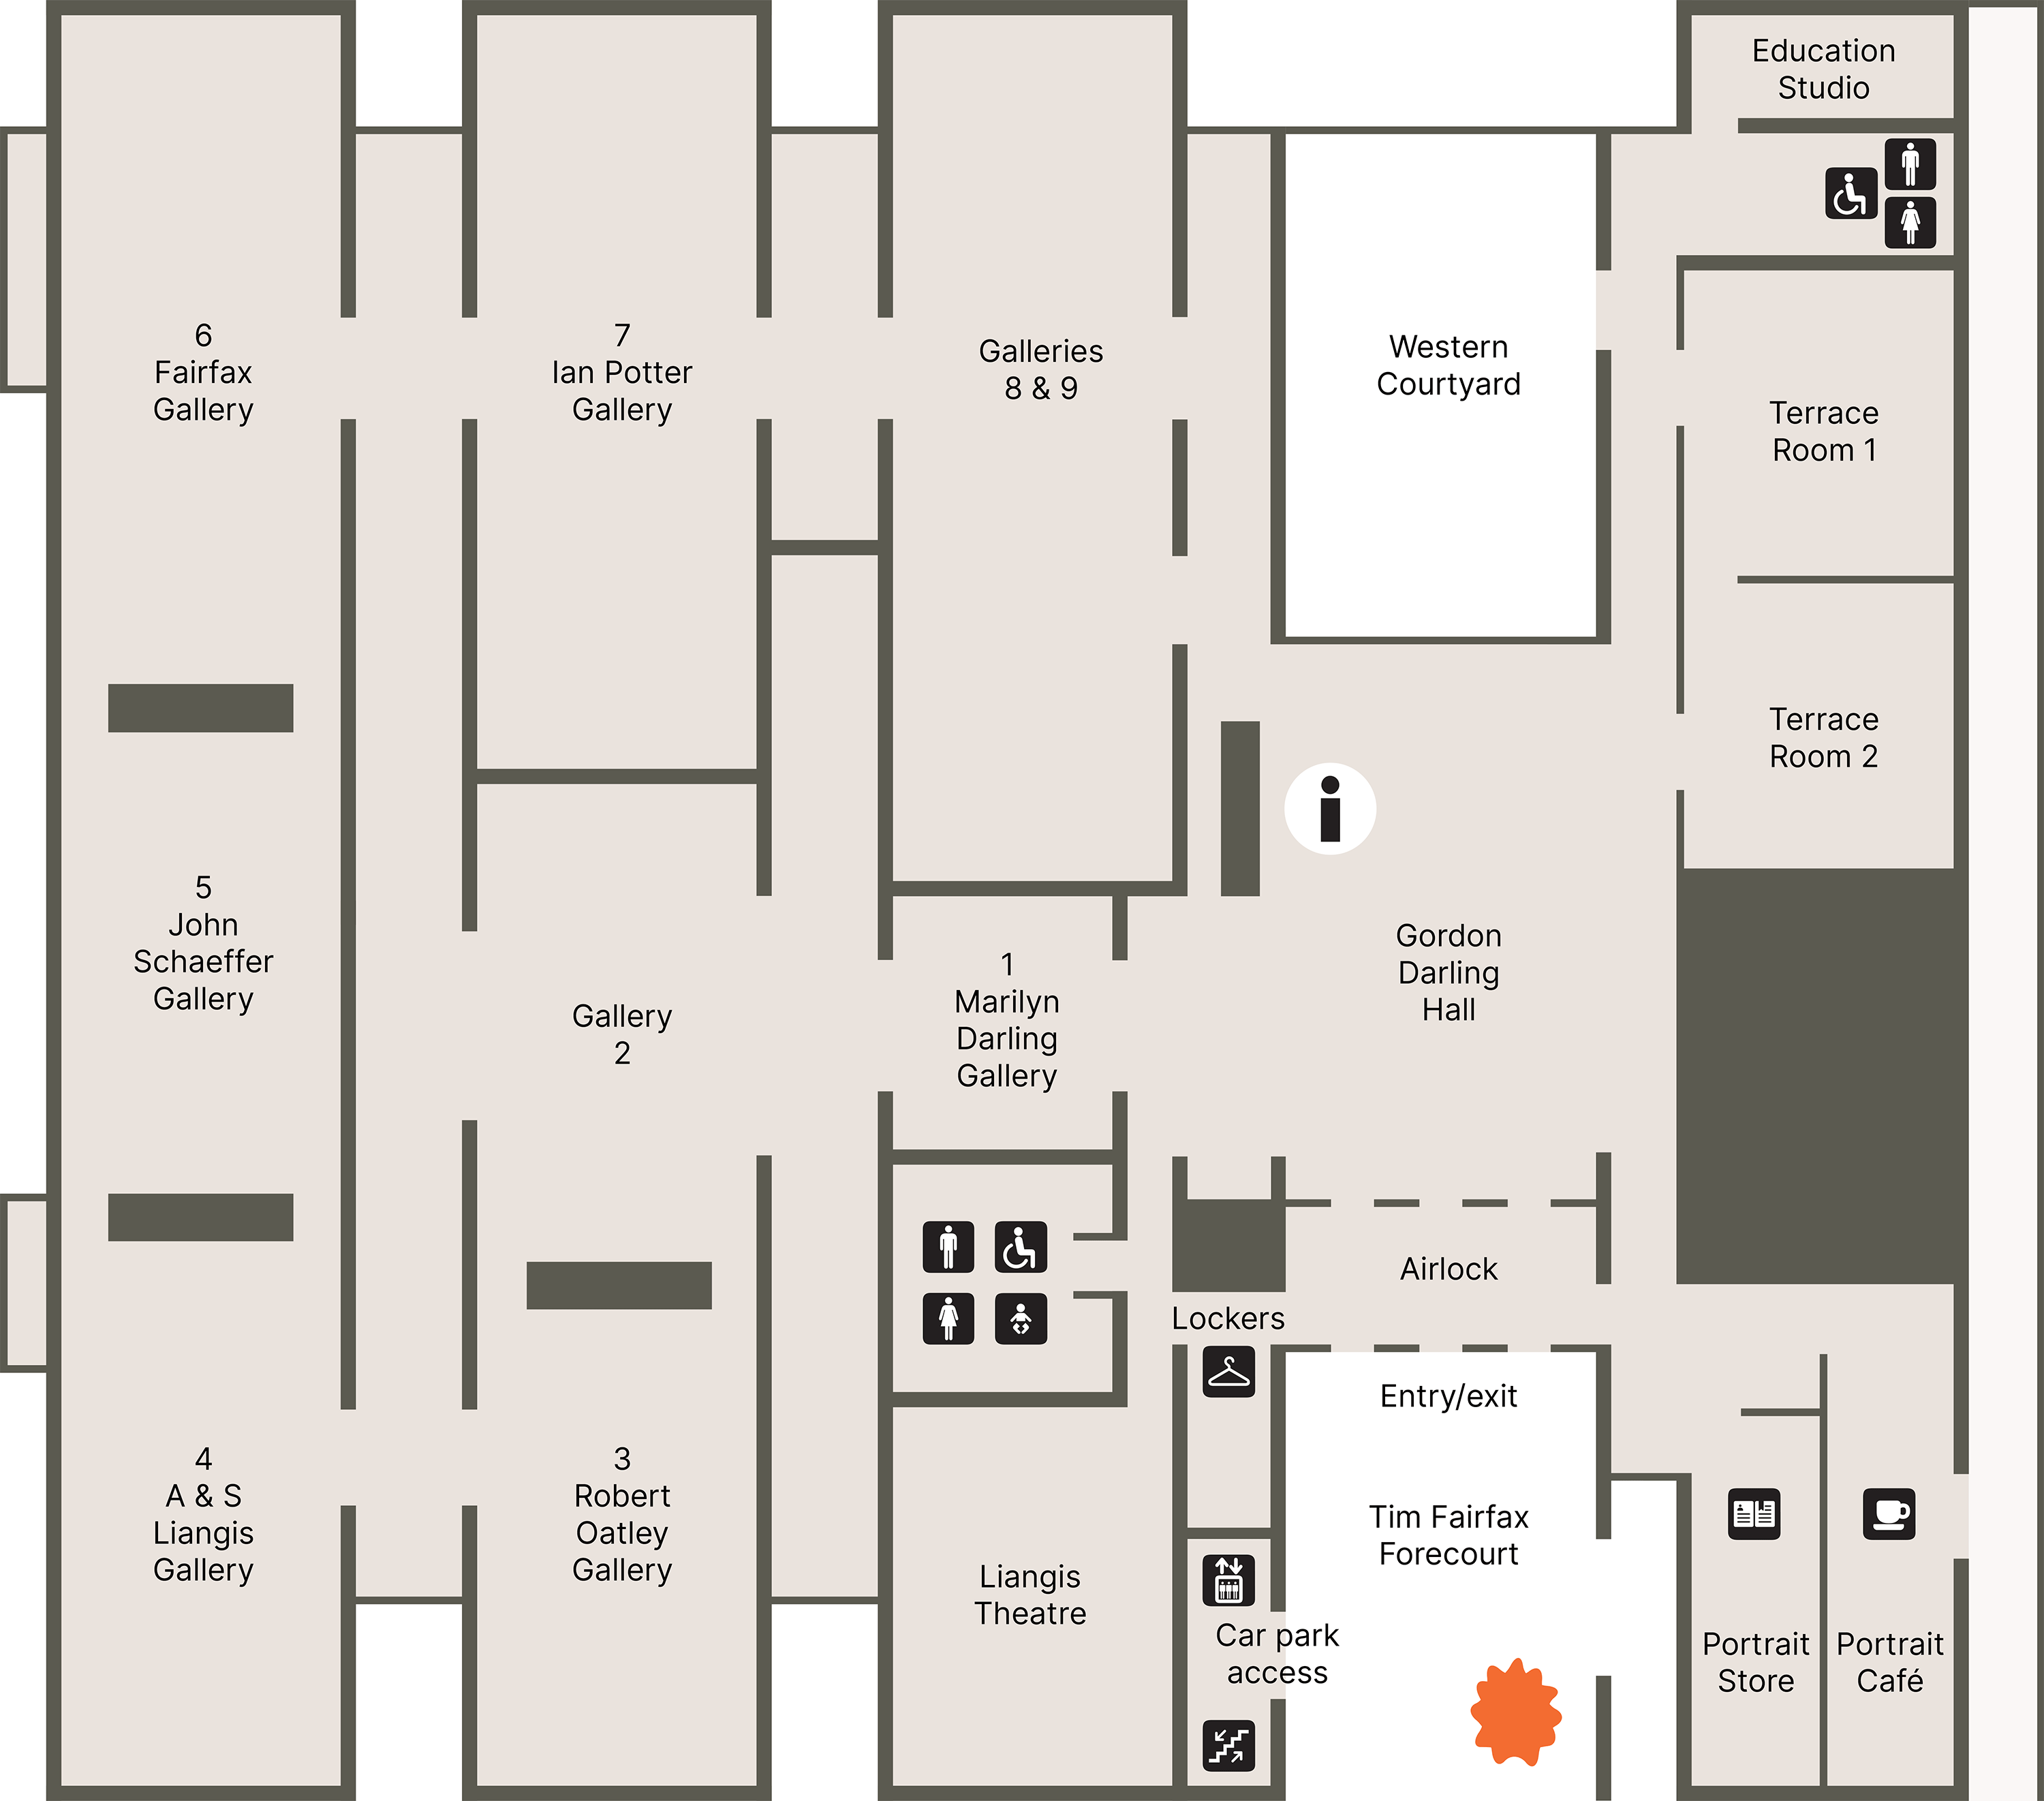 A floorplan of the Gallery showing the location of the entrance, cafe, shop and toilets